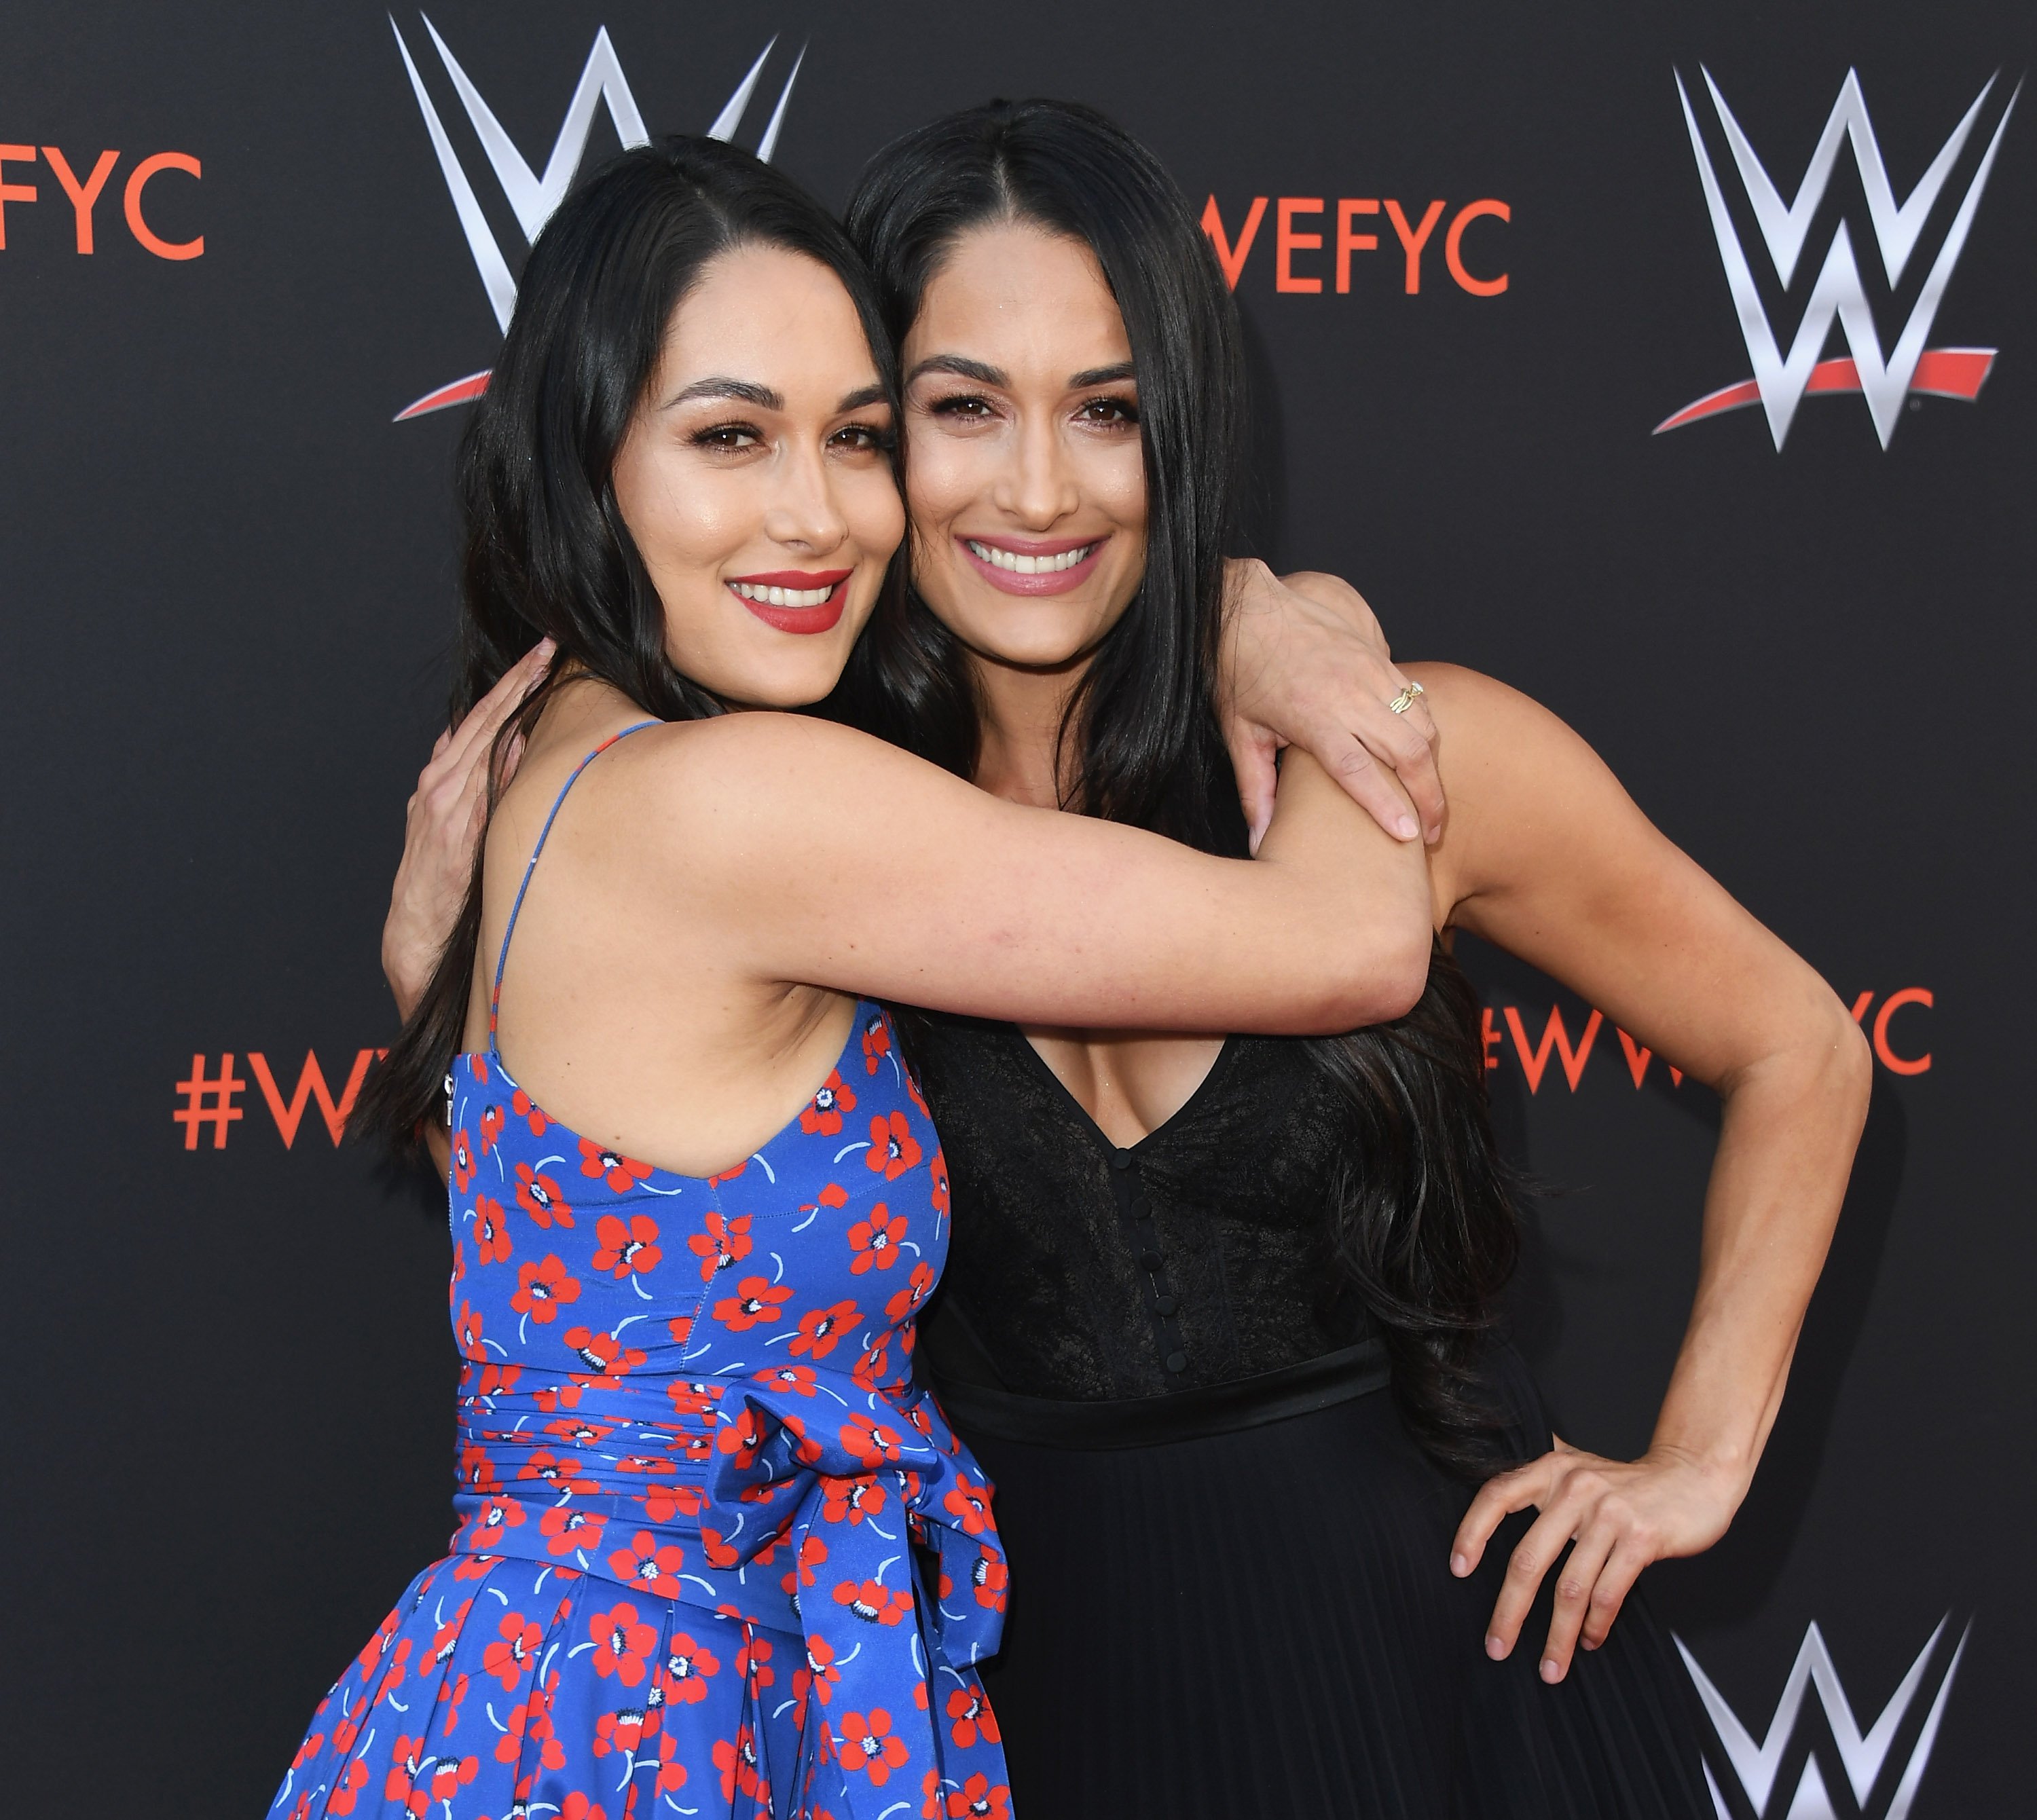 Brie Bella and Nikki Bella attend WWE's First-Ever Emmy "For Your Consideration" Event on June 6, 2018, in North Hollywood, California. | Source: Getty Images.